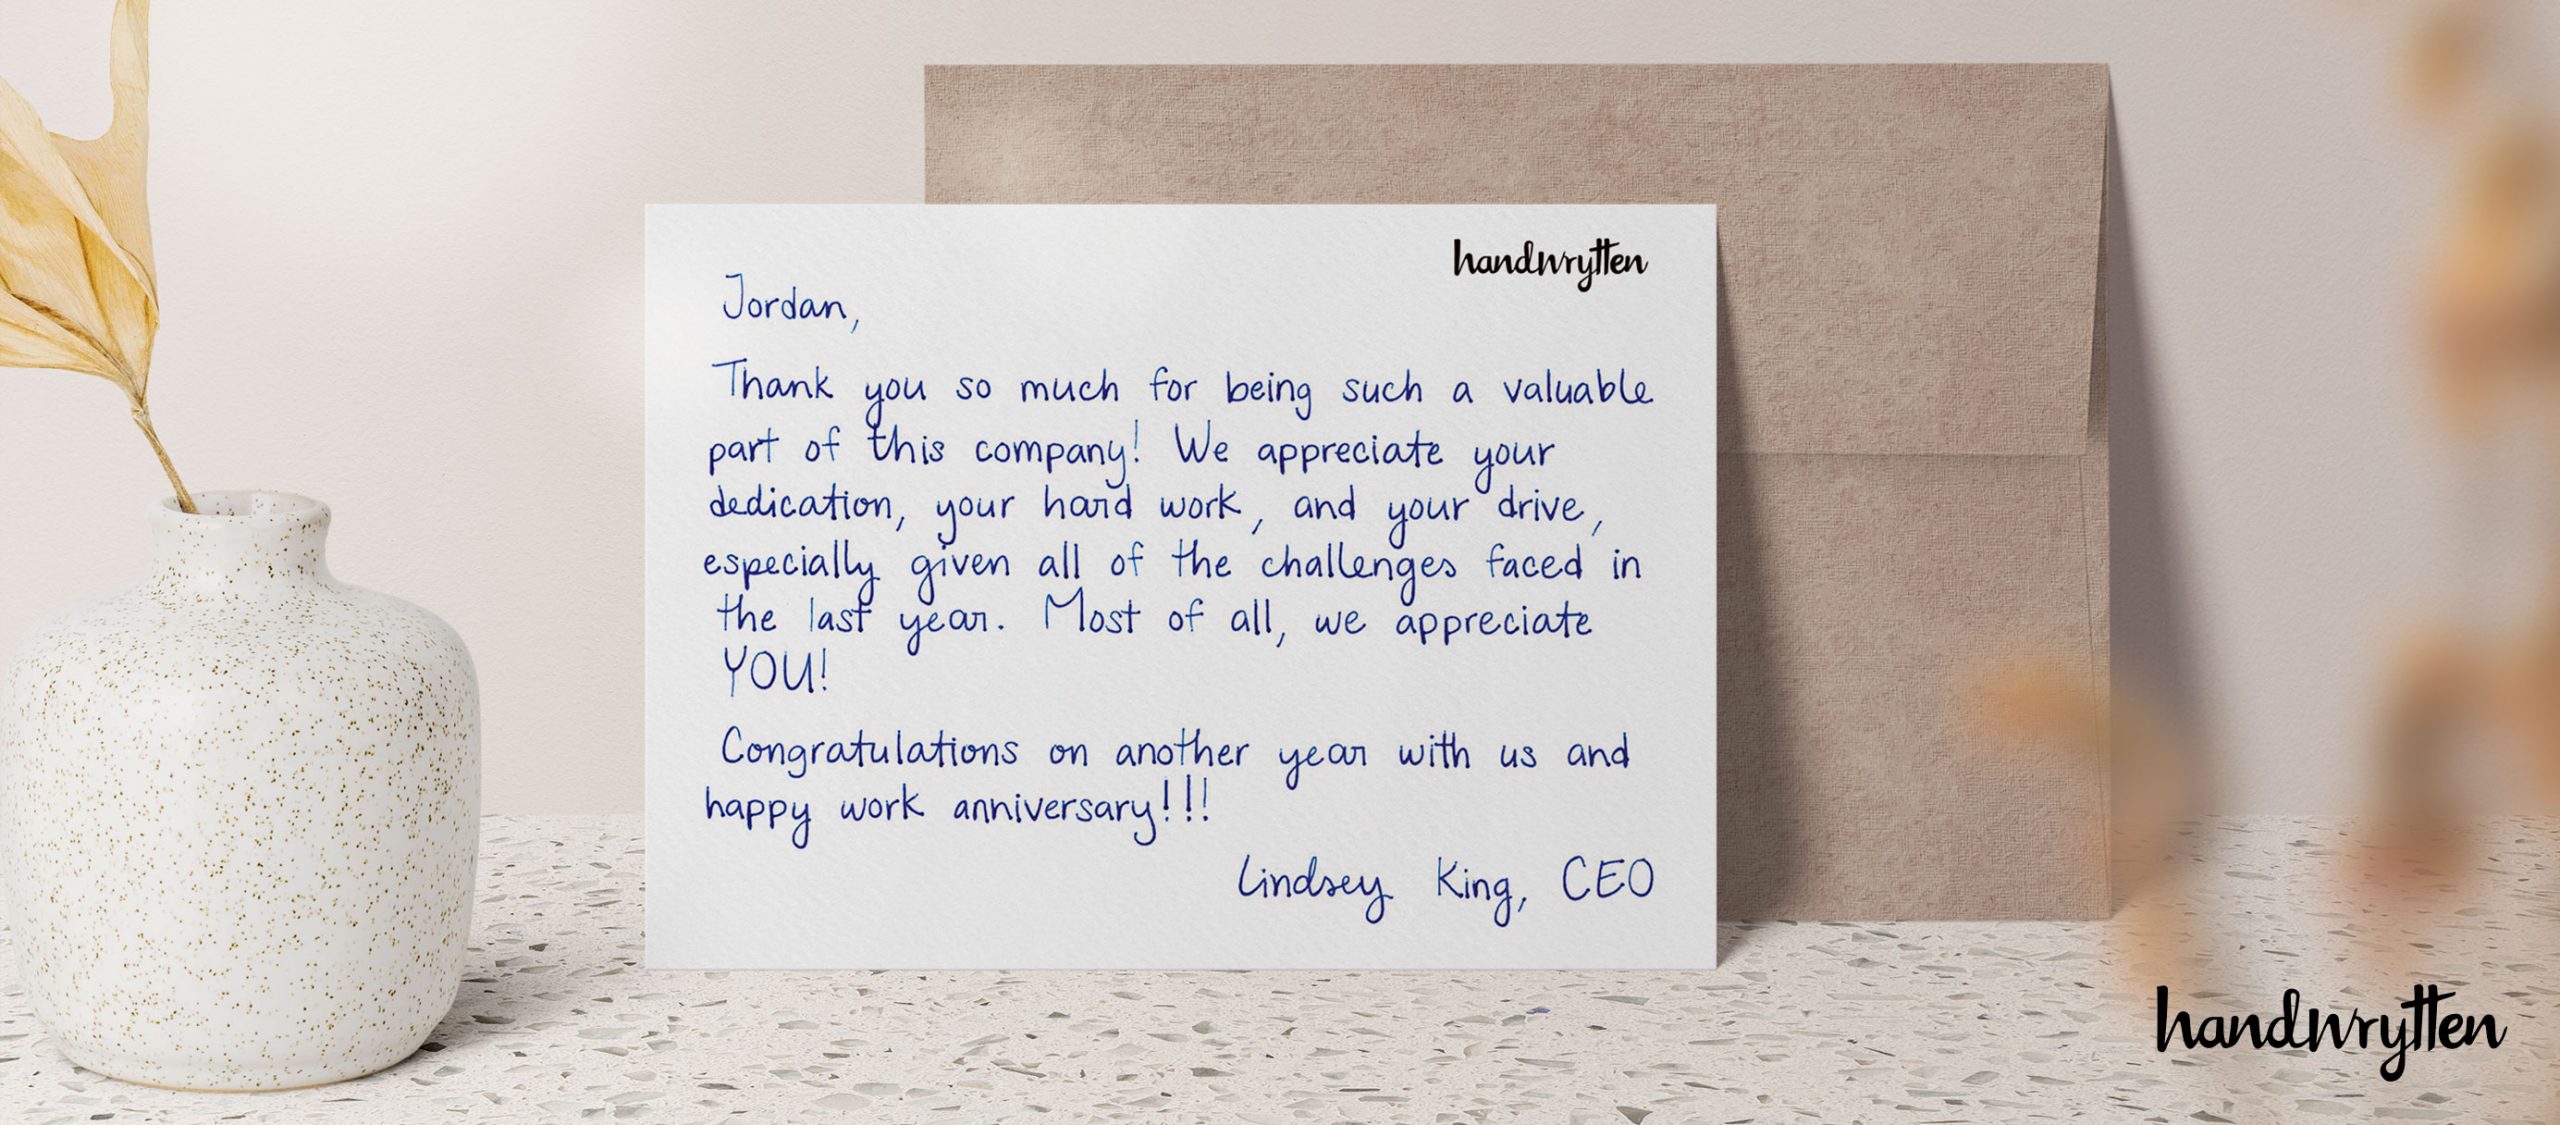 How To Write A Thank You Note To A Colleague (With Examples) - Zippia